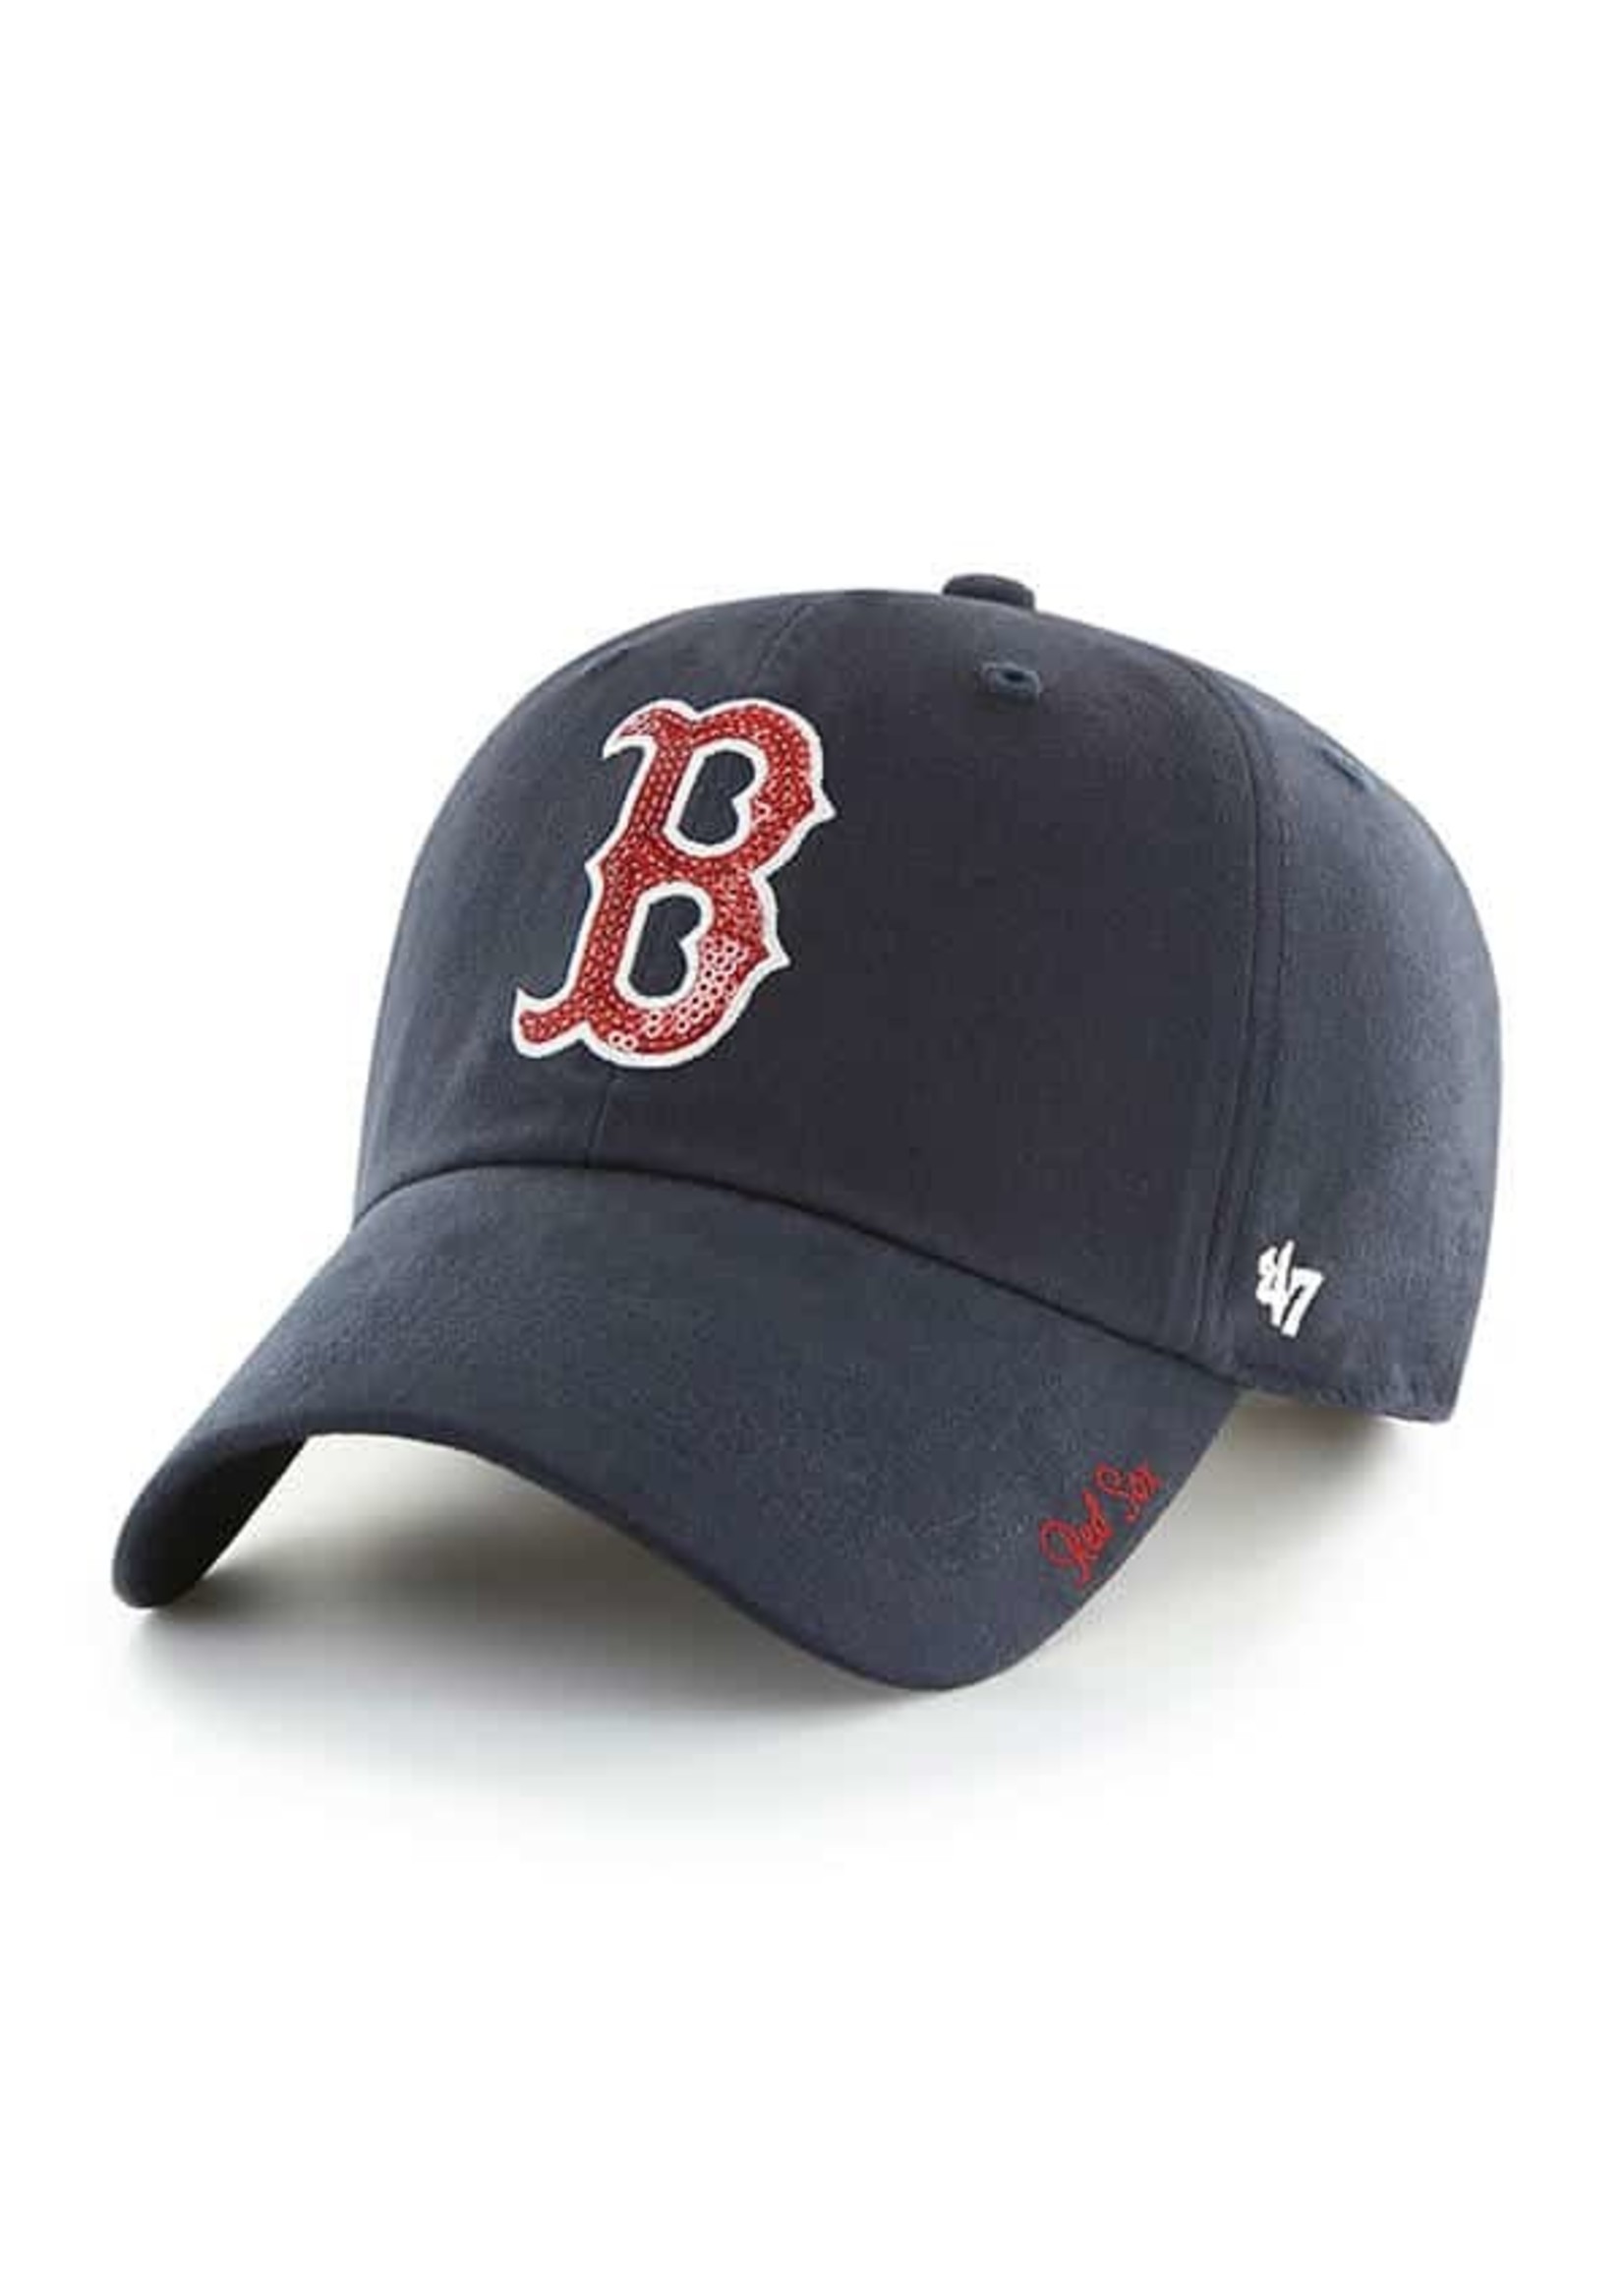 '47 Brand Boston Red Sox "B" Clean Up Hat Blue/Red Sparkle Adjustable Women